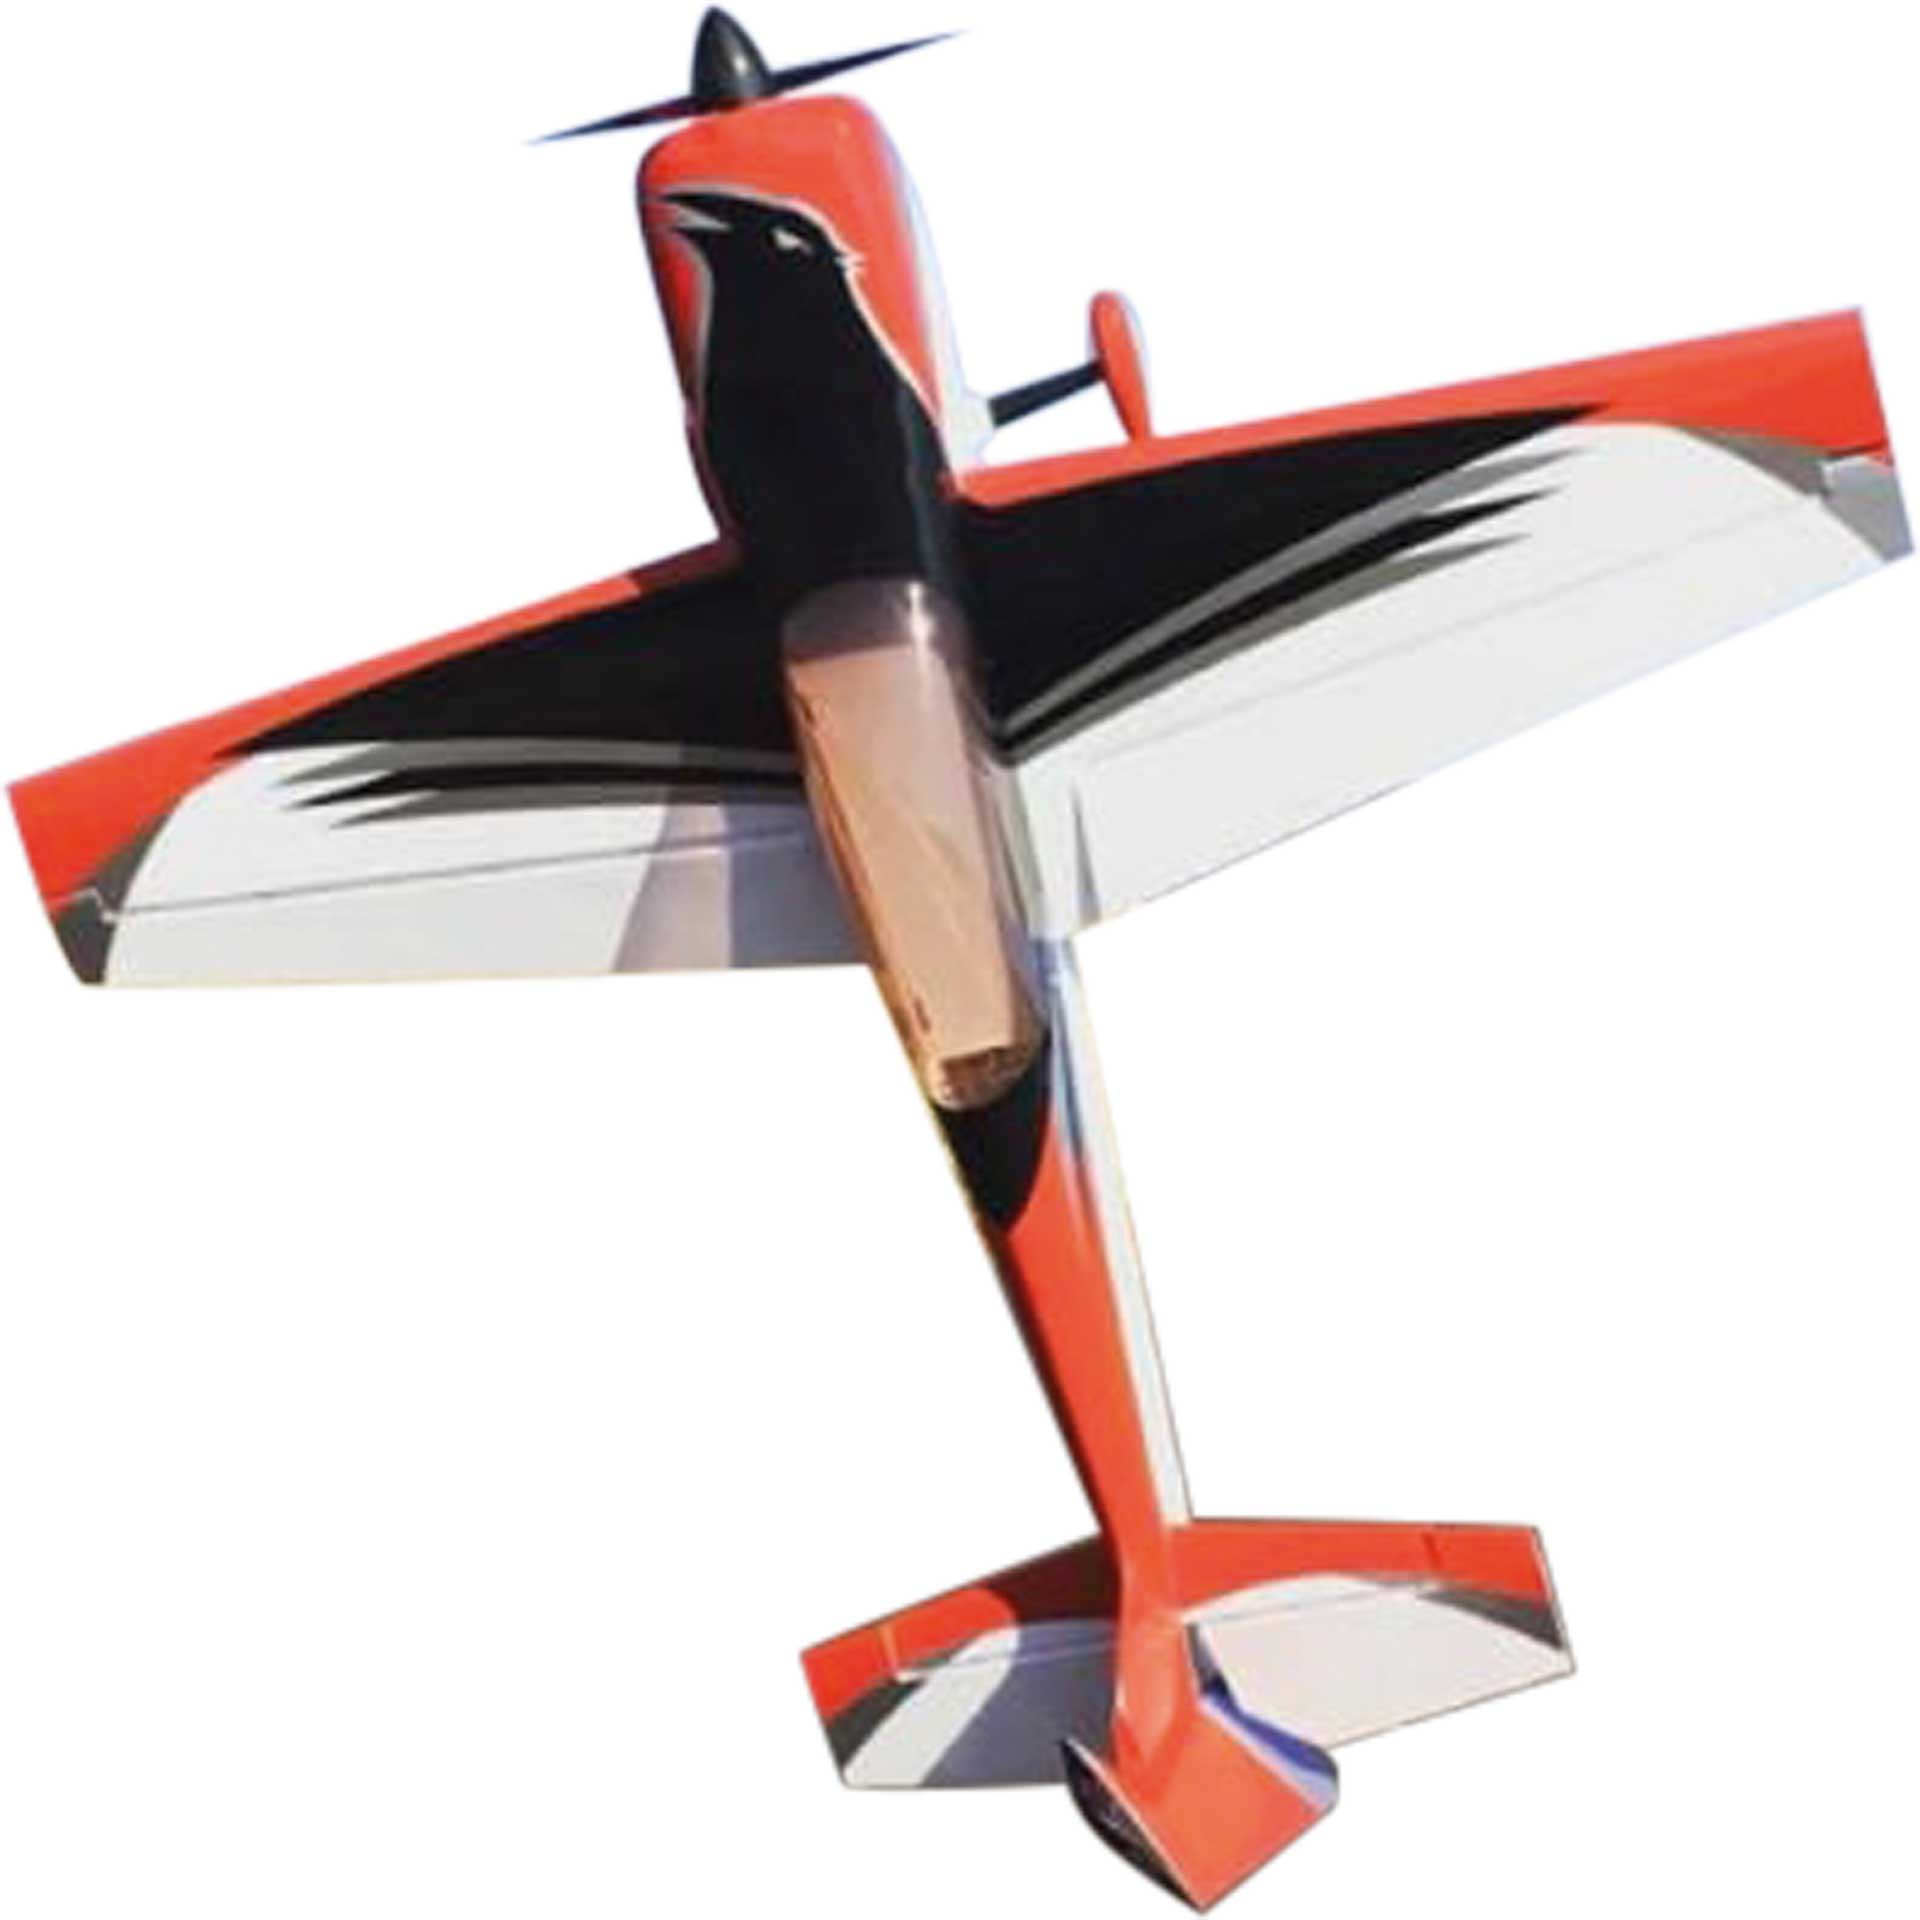 AJ AIRCRAFT Raven DT ARF 92" Rot Kunstflugmodell 2,33m ( double taper wing )